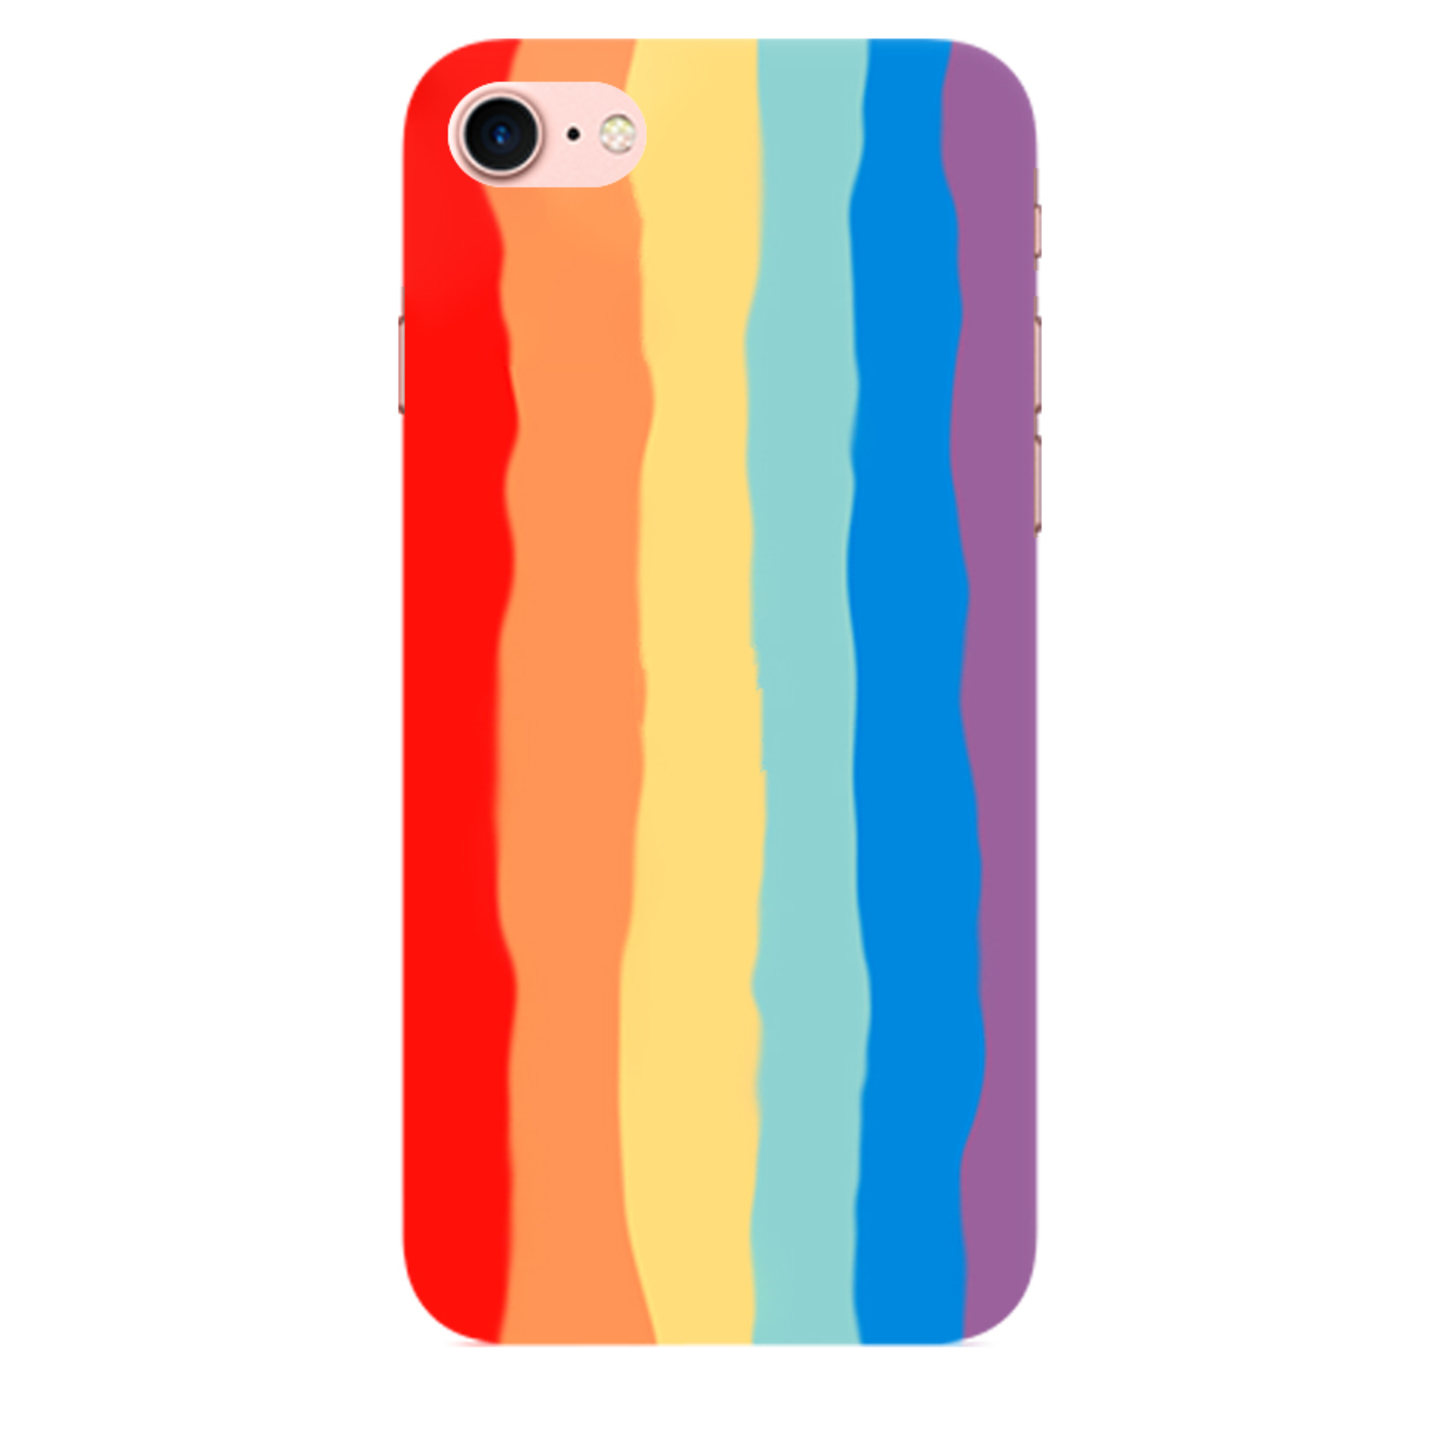 Apple iPhone pple iPhone 7 Printed Back Cases and Cover iPhone 7 Multi-Coloured